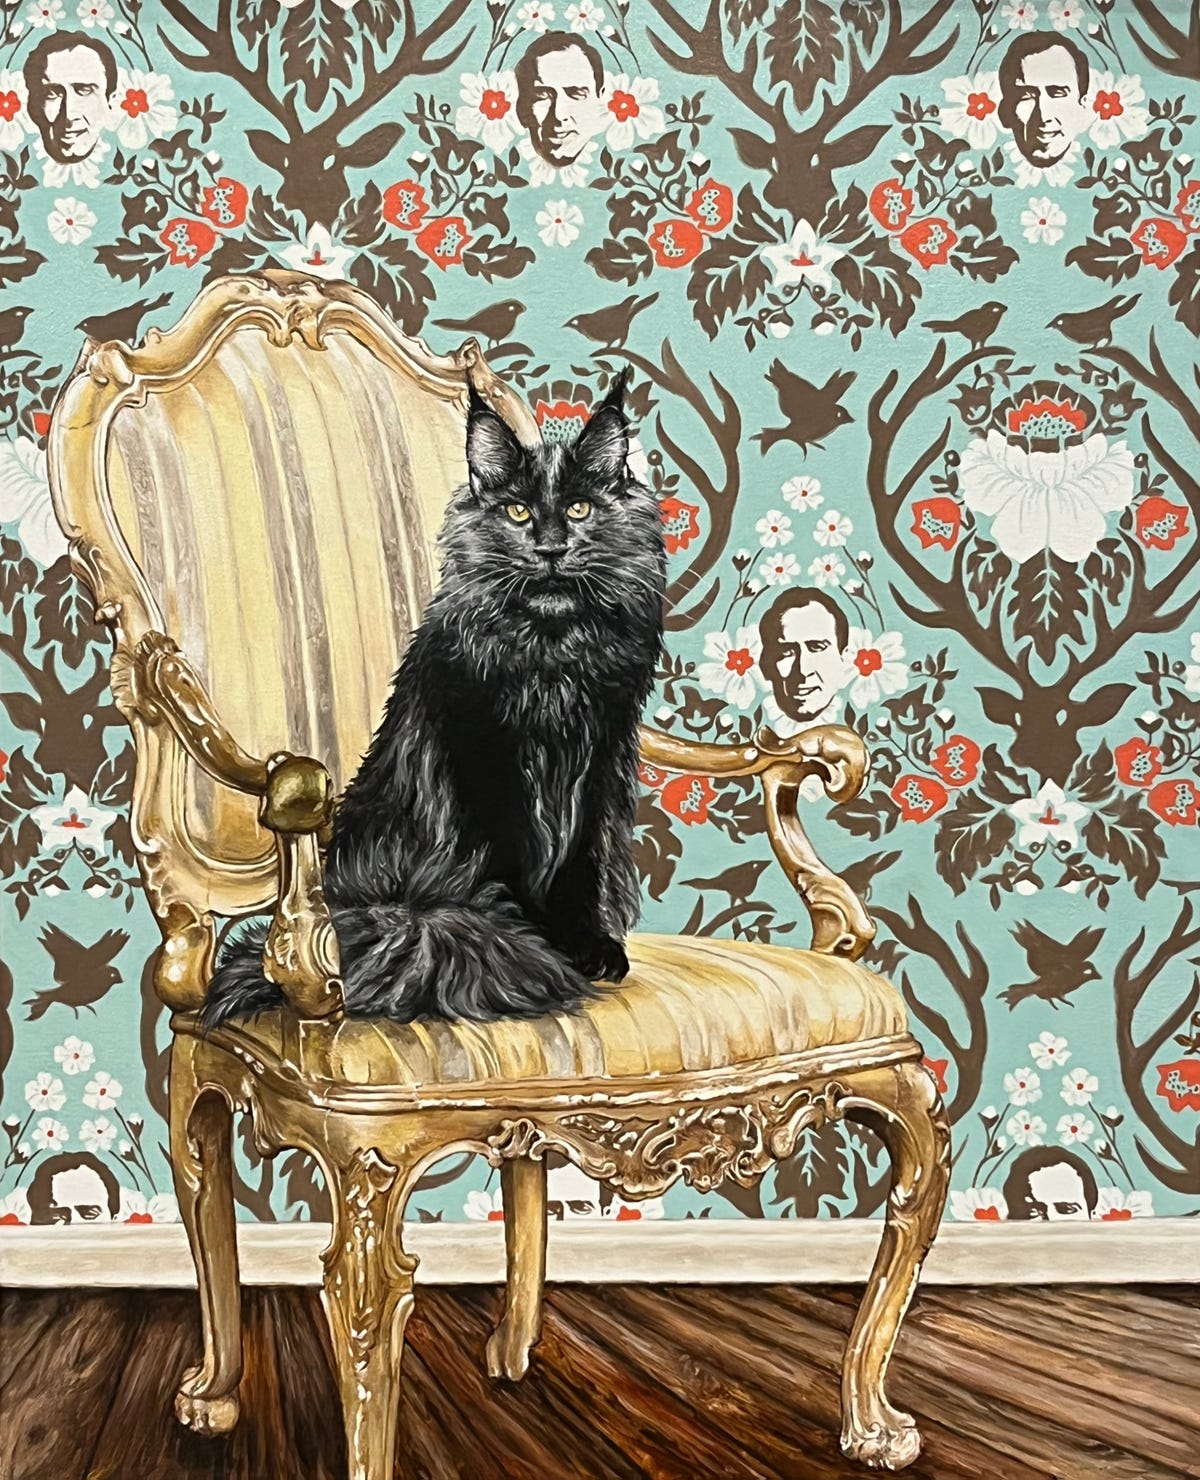 Merlin, an oil on canvas by Michael Caines, show's Nic Cage's cat sitting in a chair in front of wallpaper with Cage's face on it